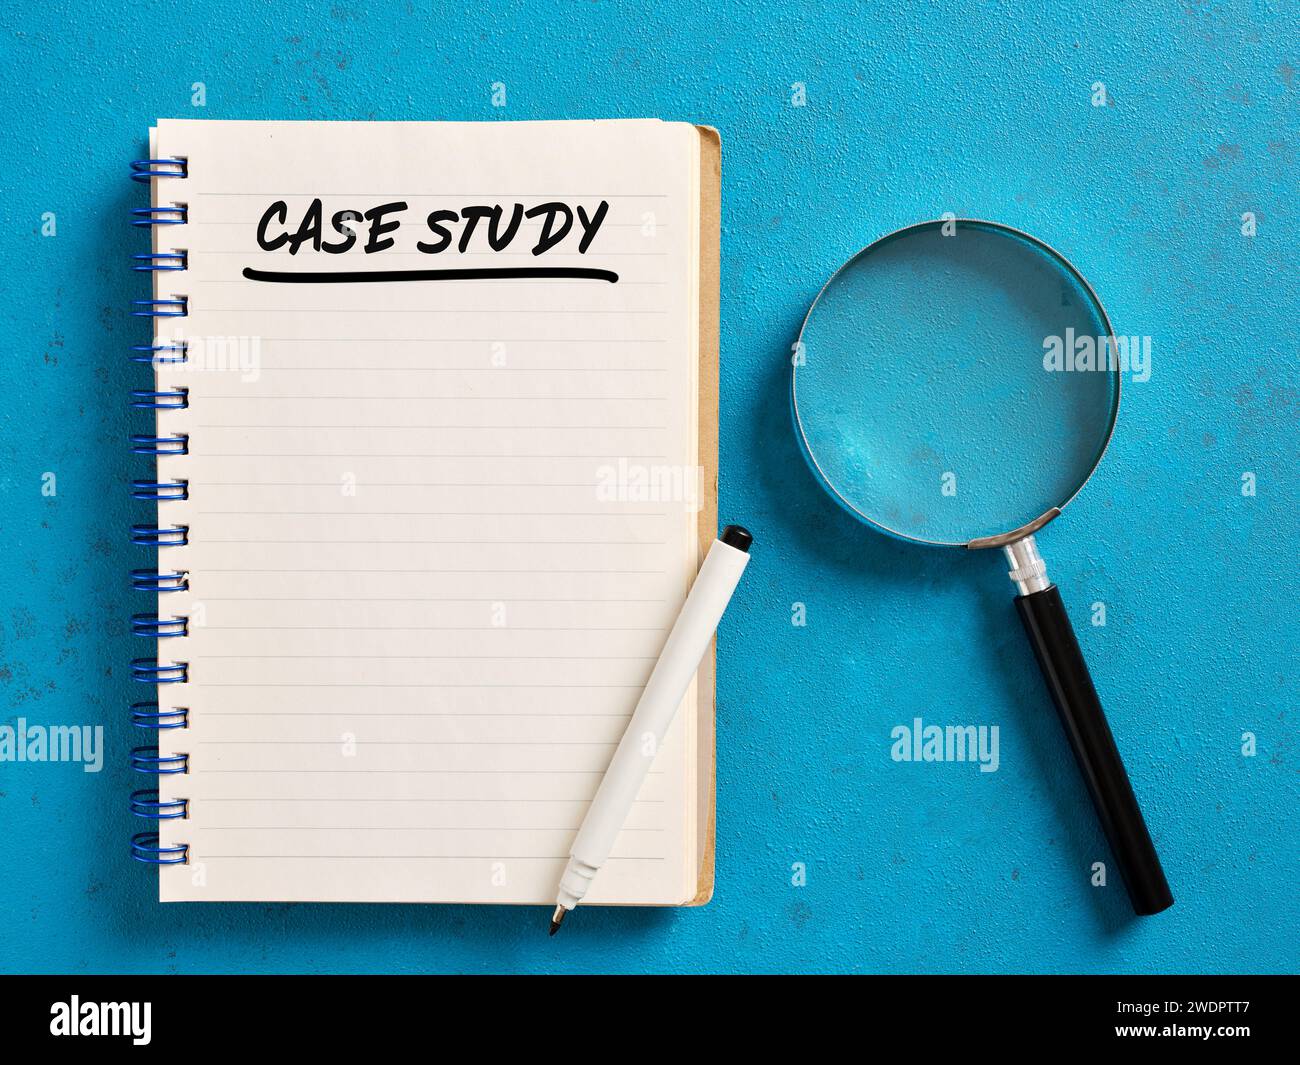 The word case study handwritten an a notebook with a magnifying glass. Business and education concept. Stock Photo